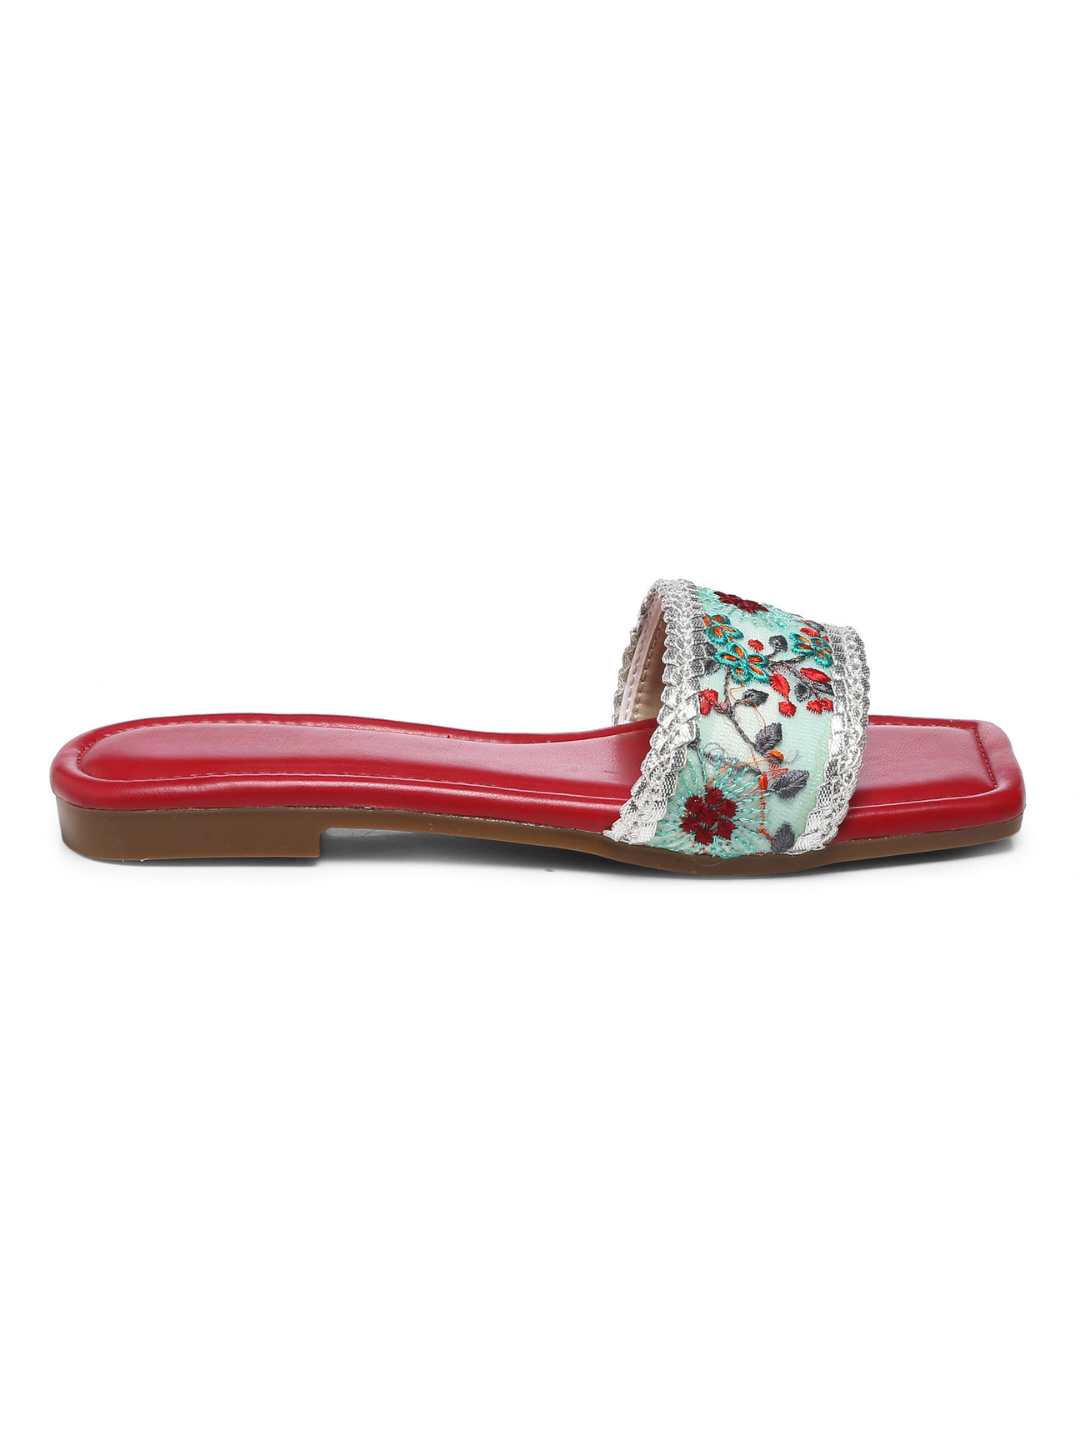 GNIST CherryBlue Embroidered Flats